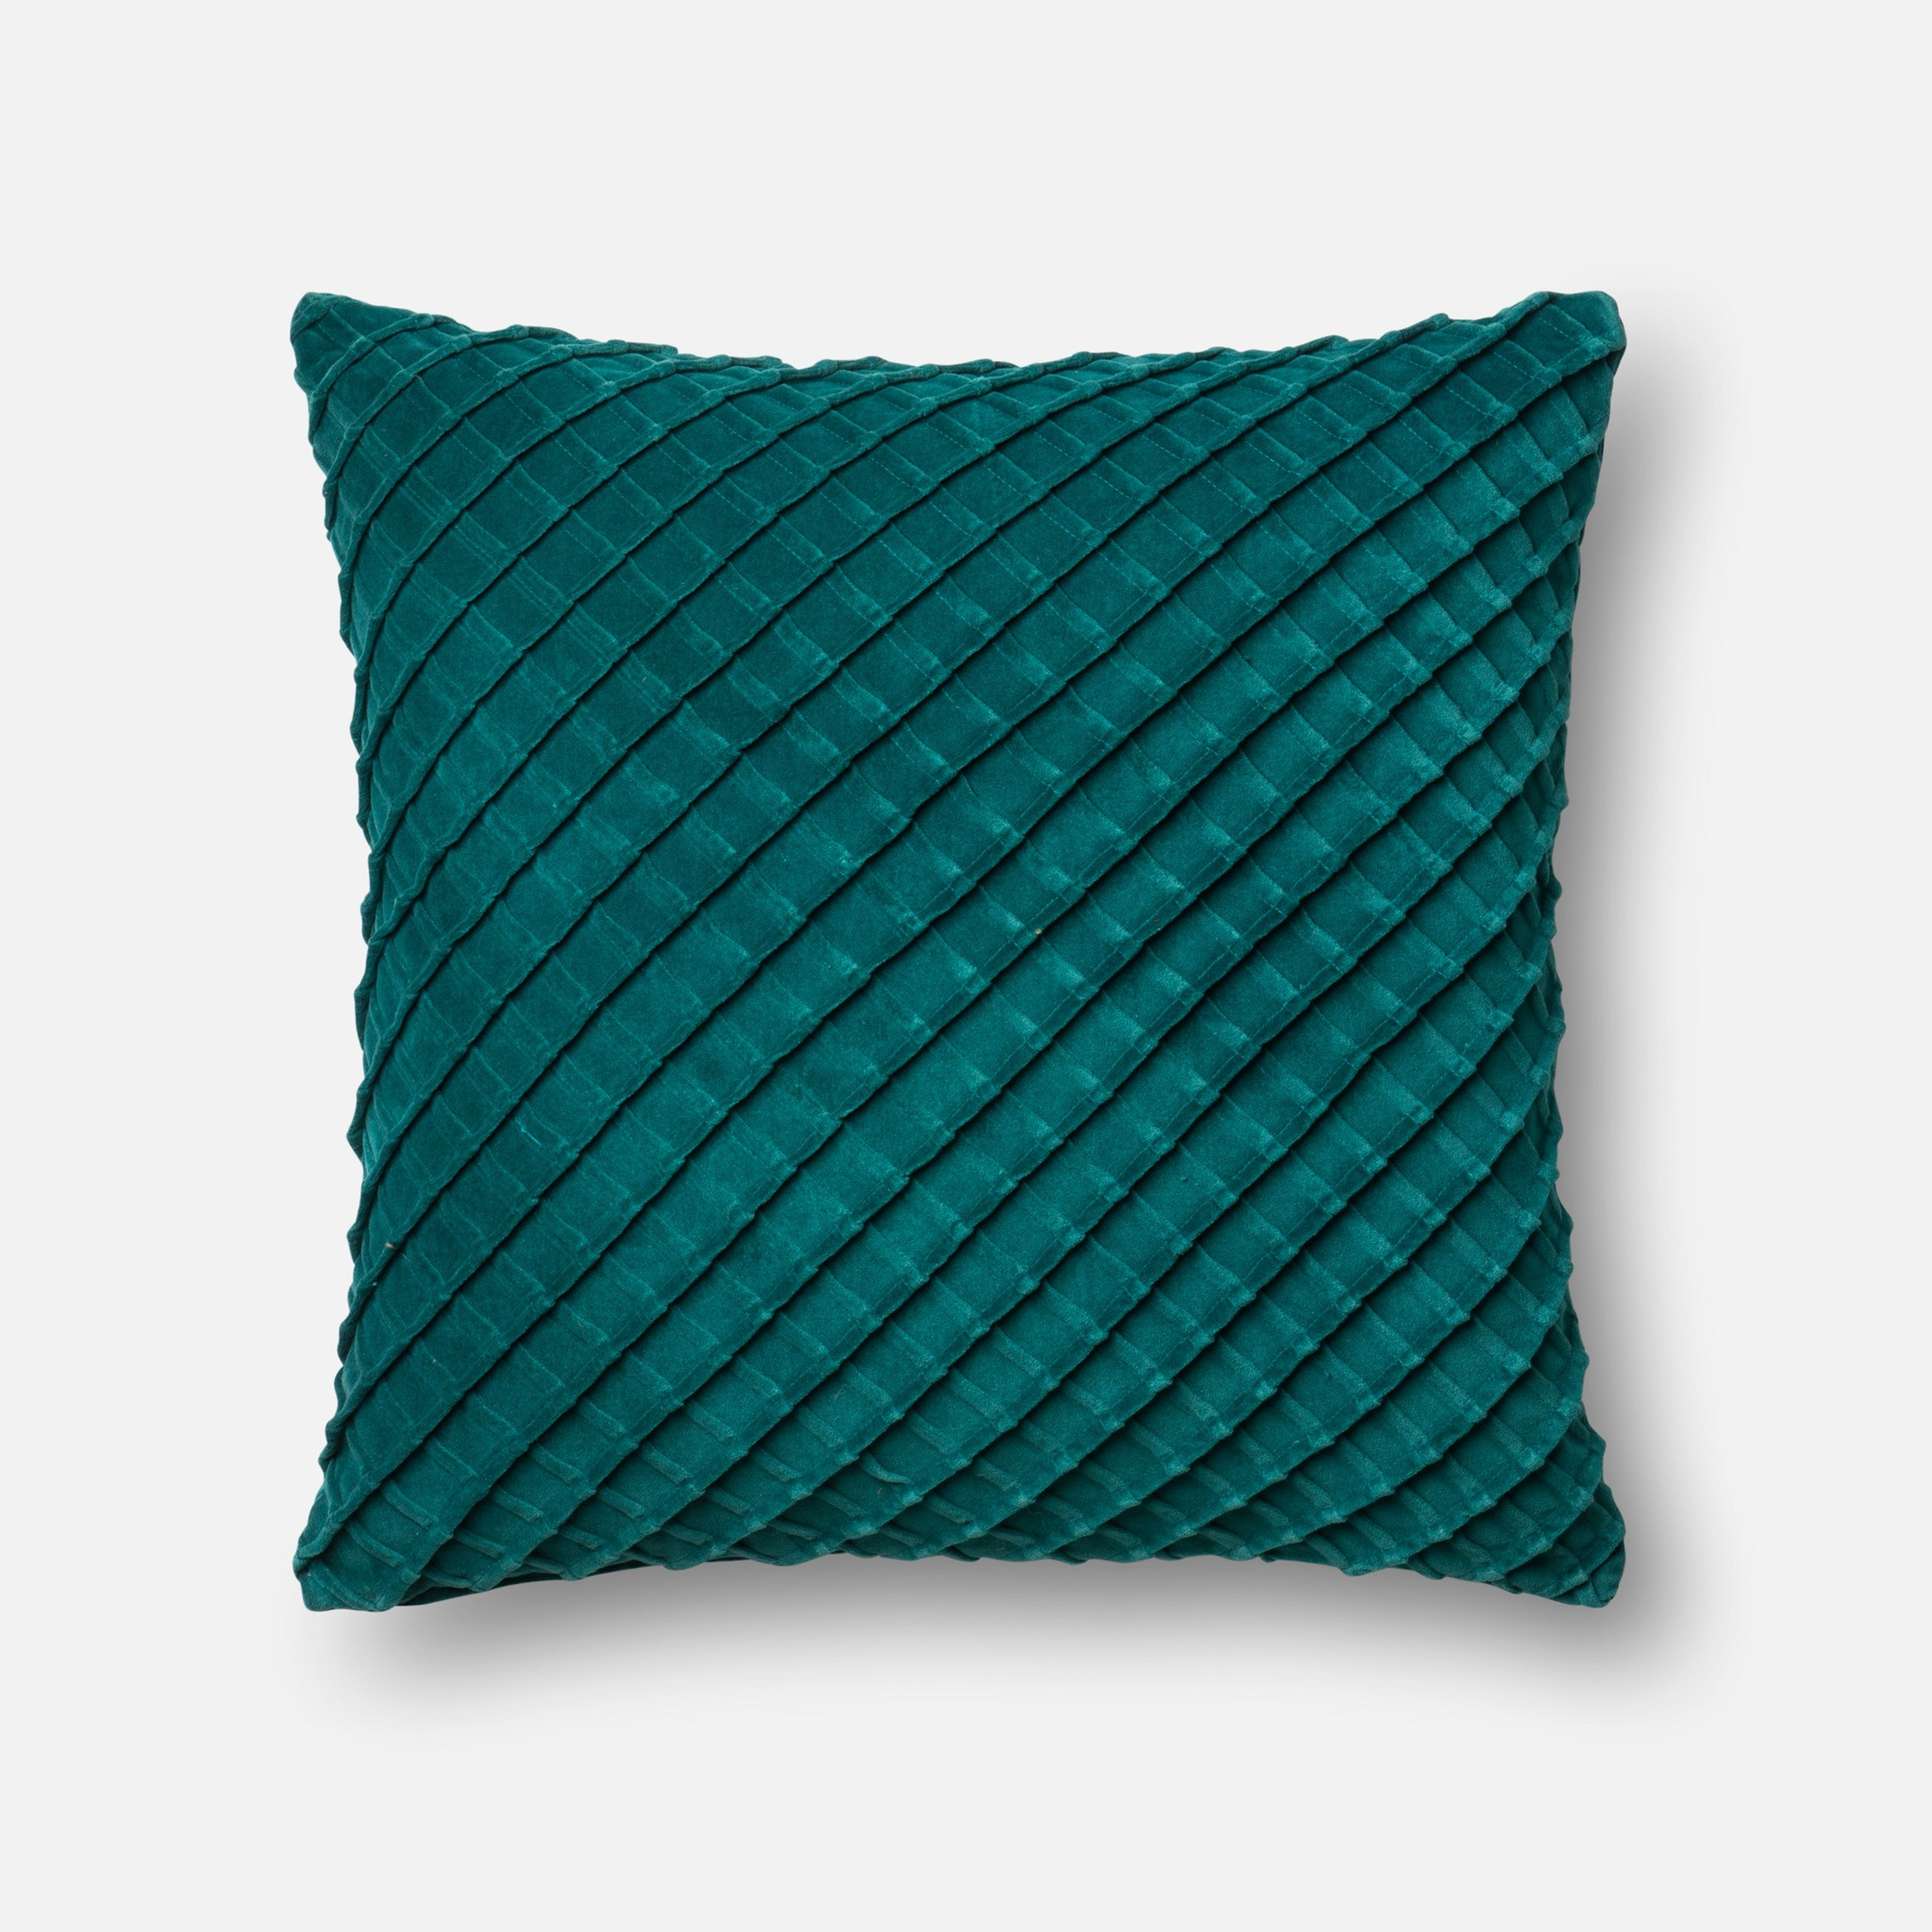 PILLOWS - TEAL - 22" X 22" Cover Only - Loloi Rugs